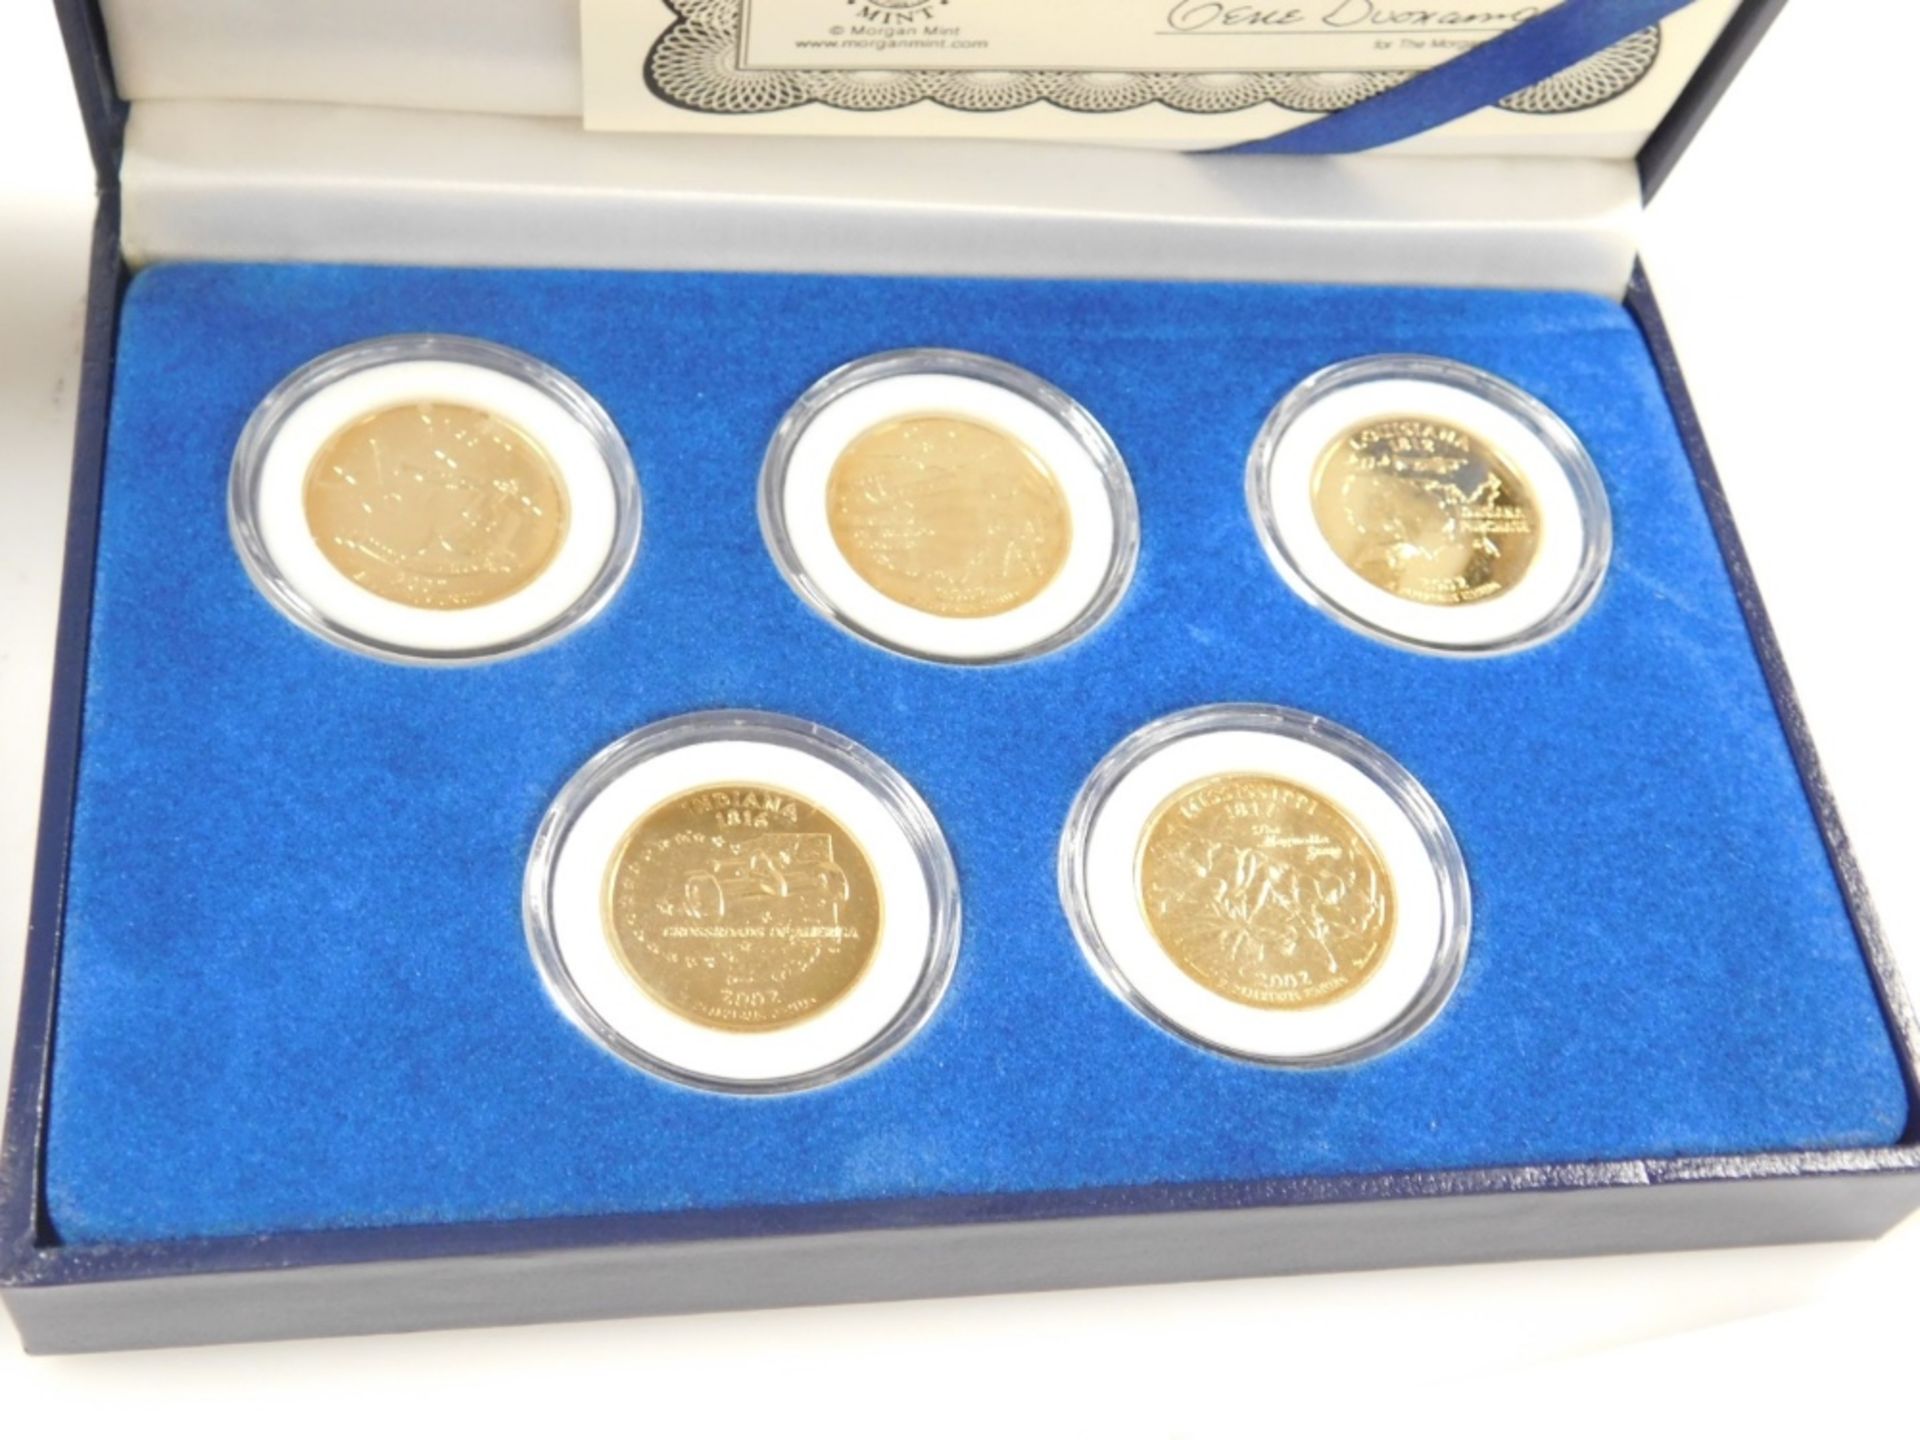 Five Statehood quarter dollars, the Morgan Mint, special edition, four sets, 2003, all boxed with ce - Image 5 of 6